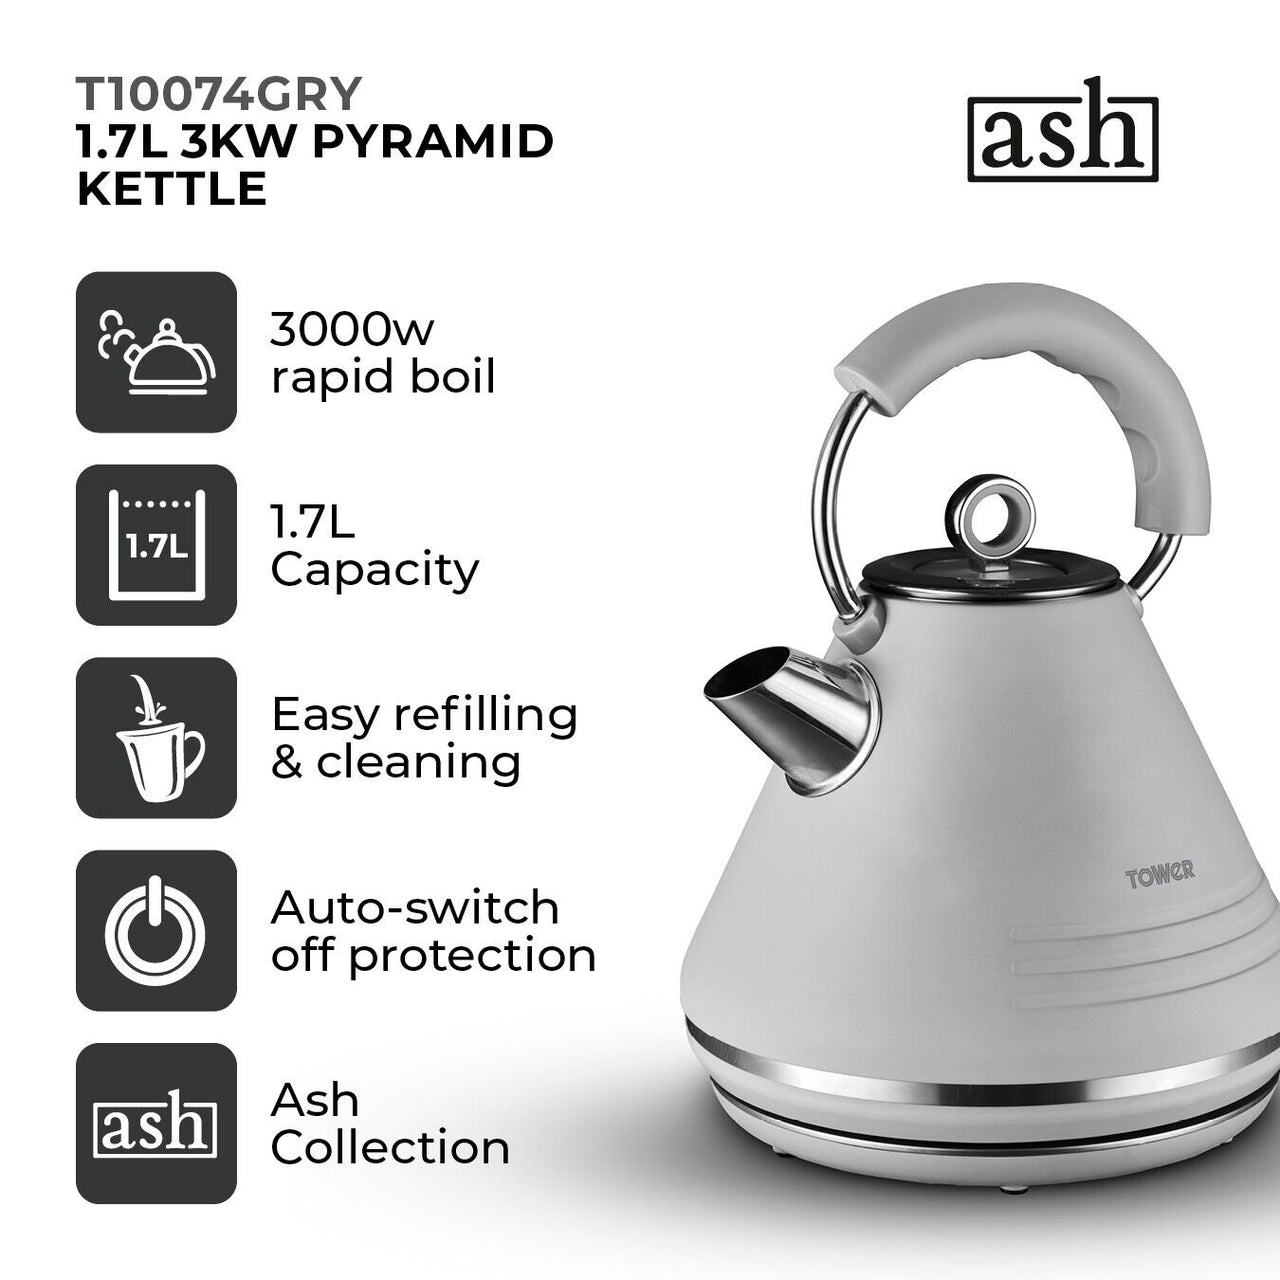 Tower Ash Grey 1.7L 3KW Pyramid Kettle Contemporary Design T10074GRY